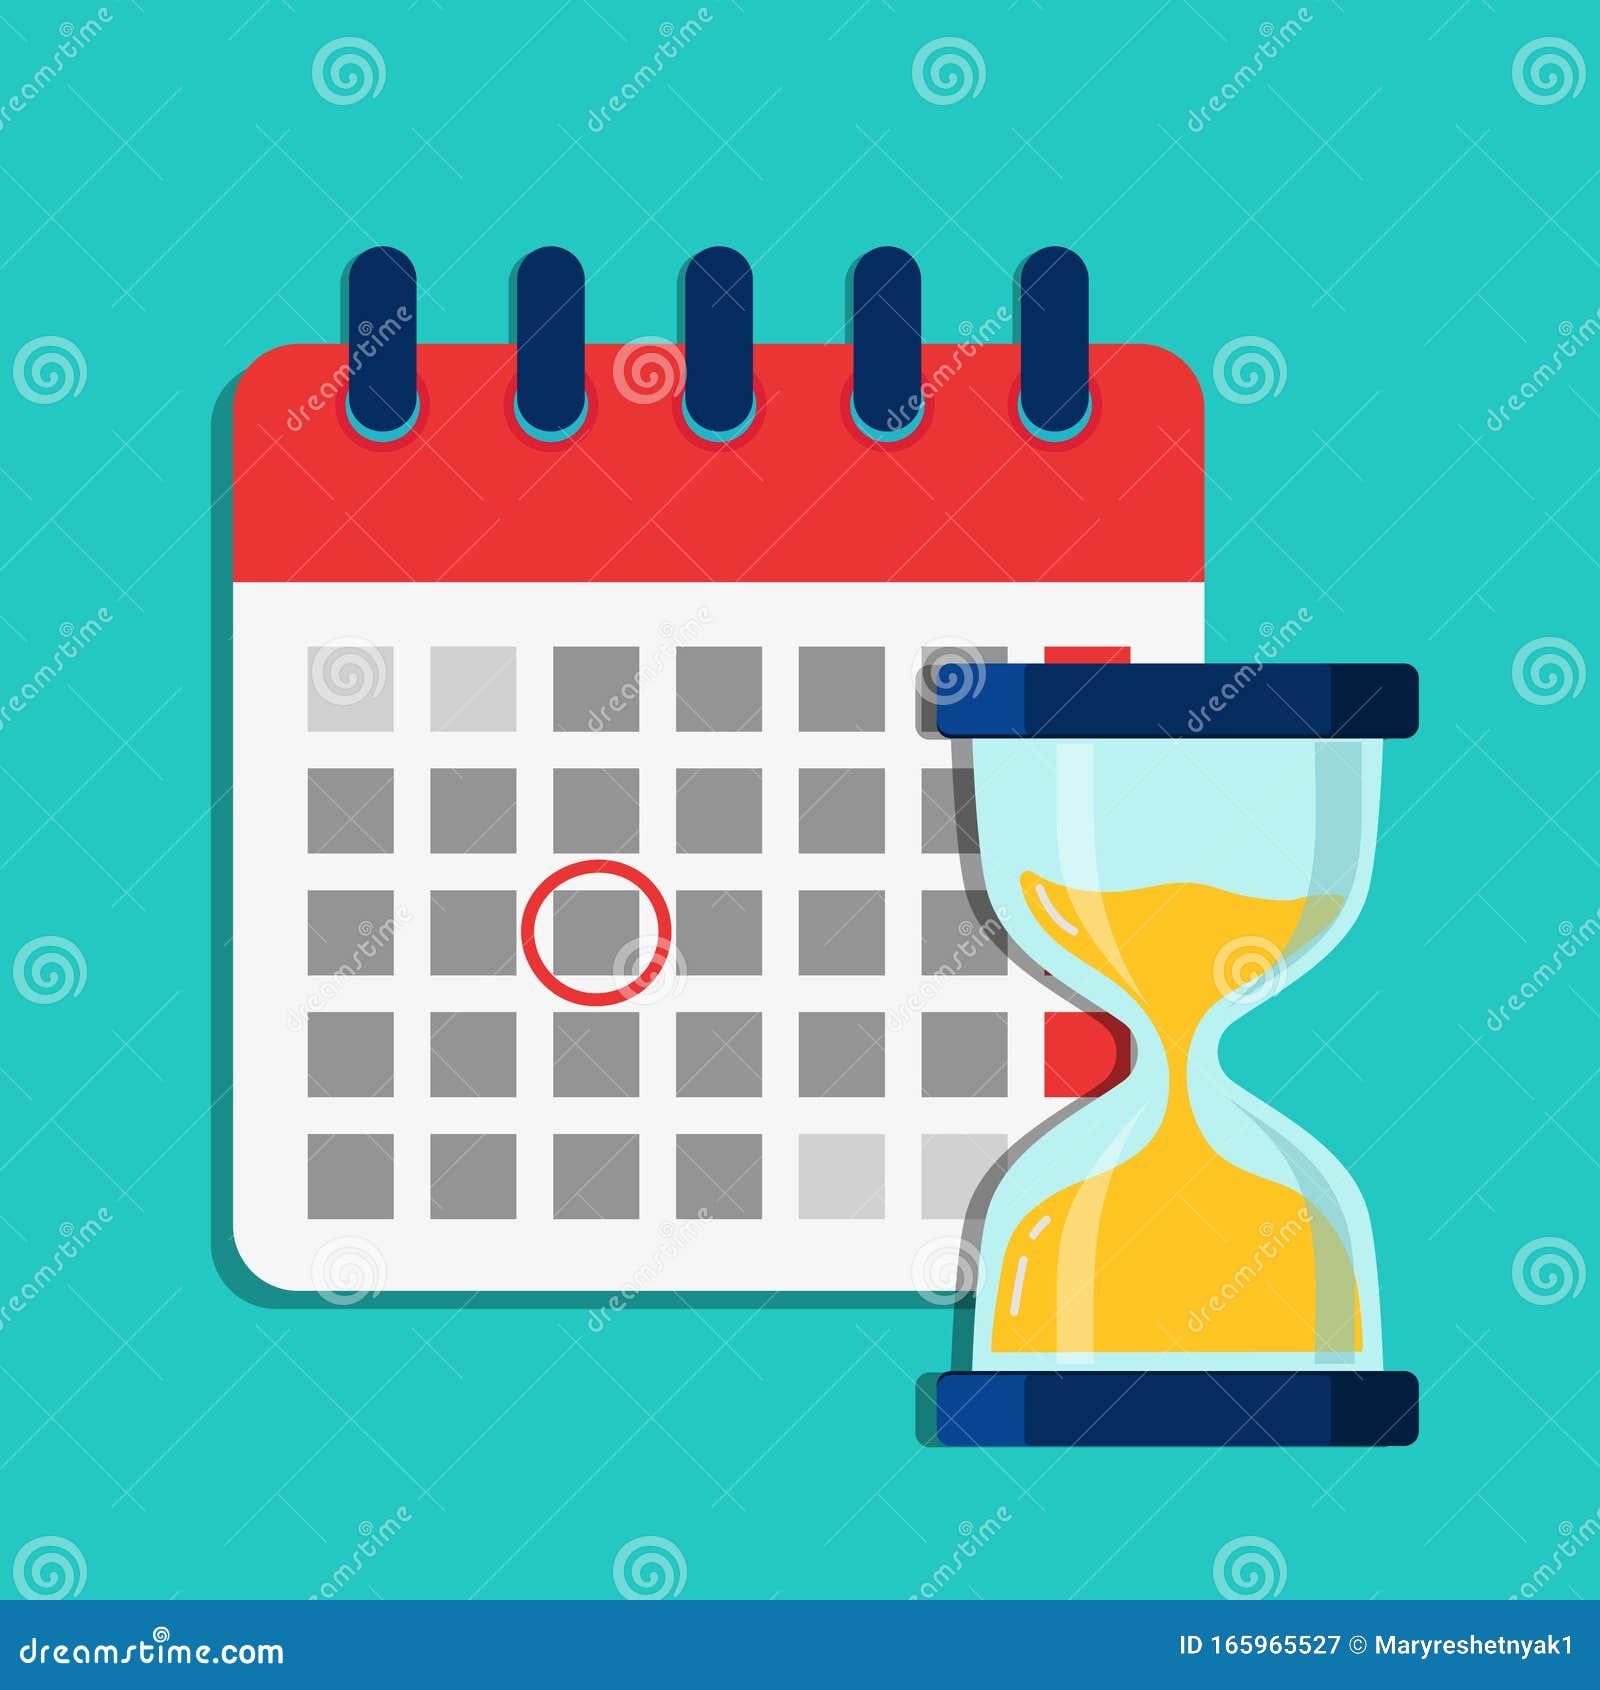 deadline calendar with hourglass. flat  with schedule of calendar. cartoon organizer, timesheet, time management with